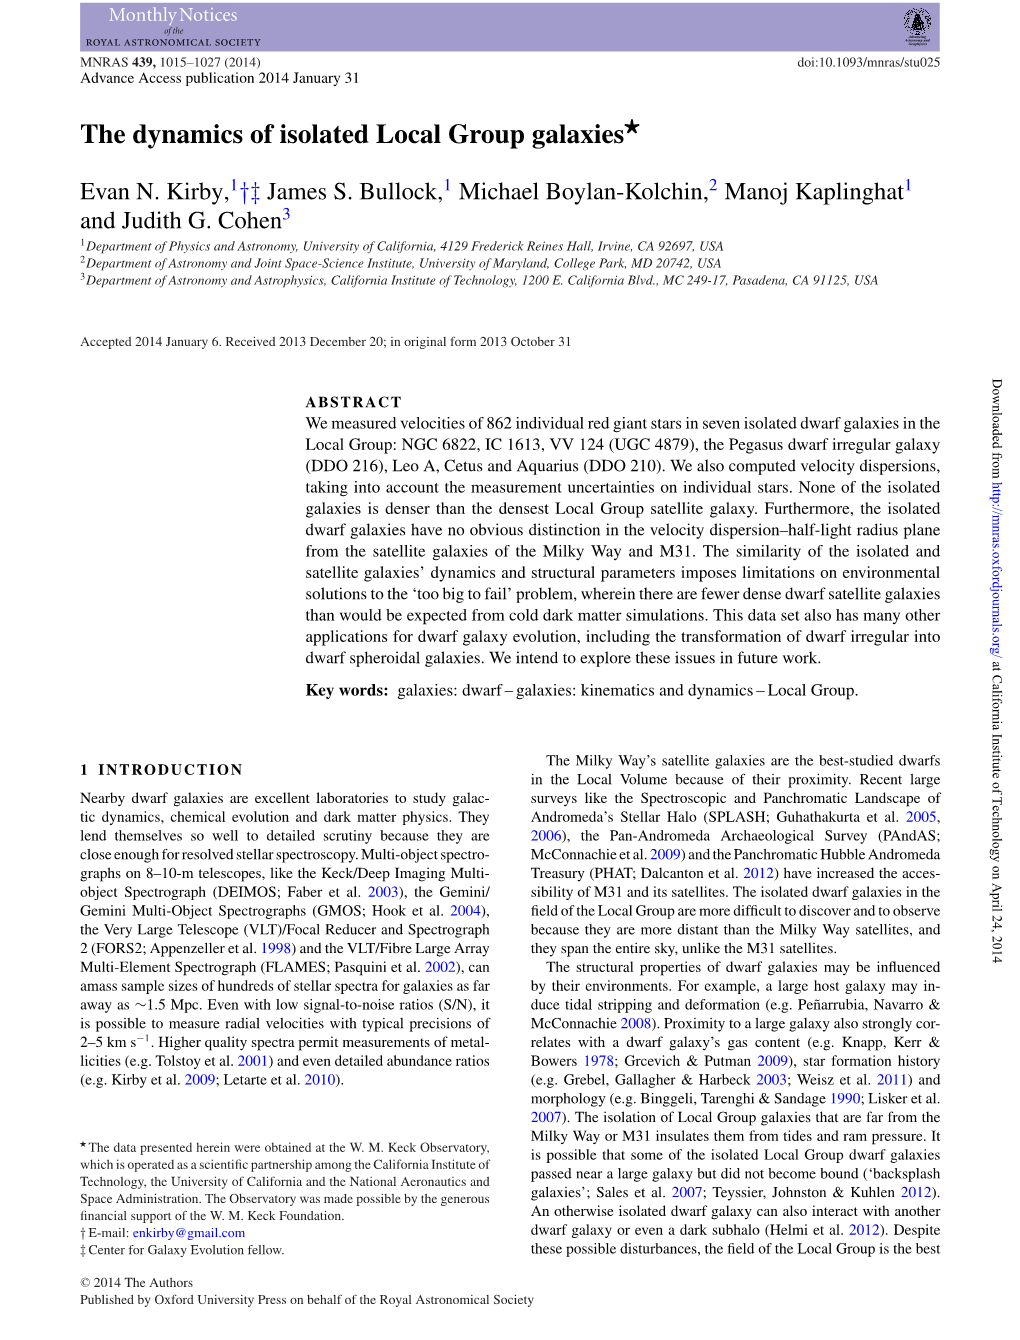 The Dynamics of Isolated Local Group Galaxies ⋆